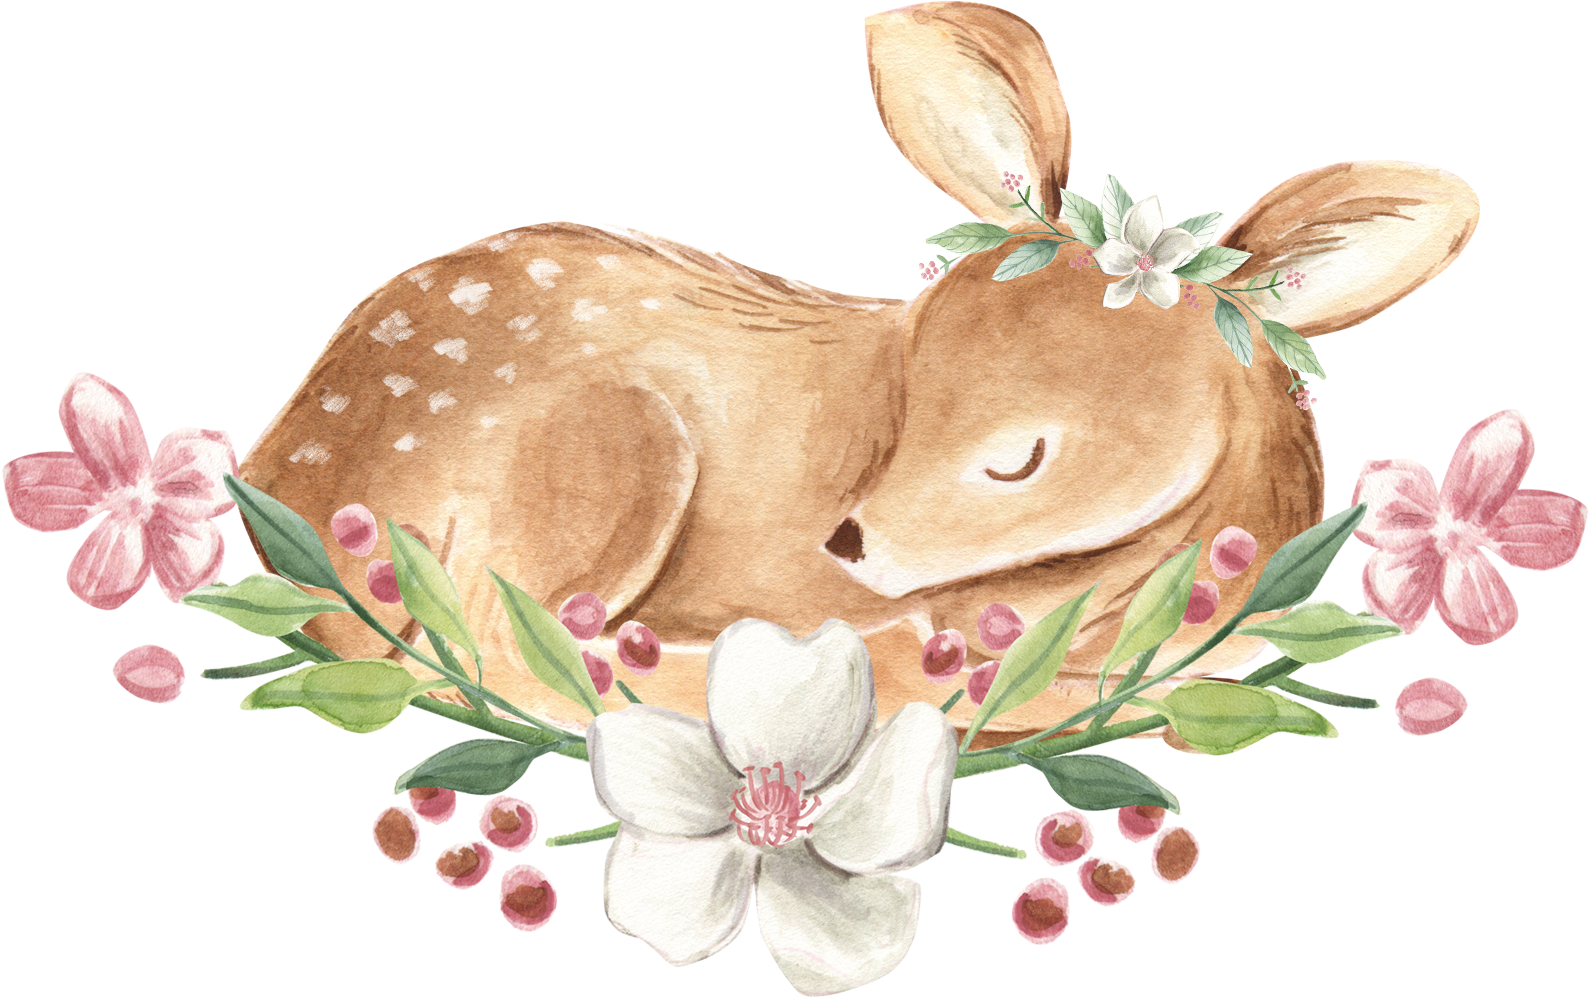 A Watercolor Of A Deer Sleeping With Flowers